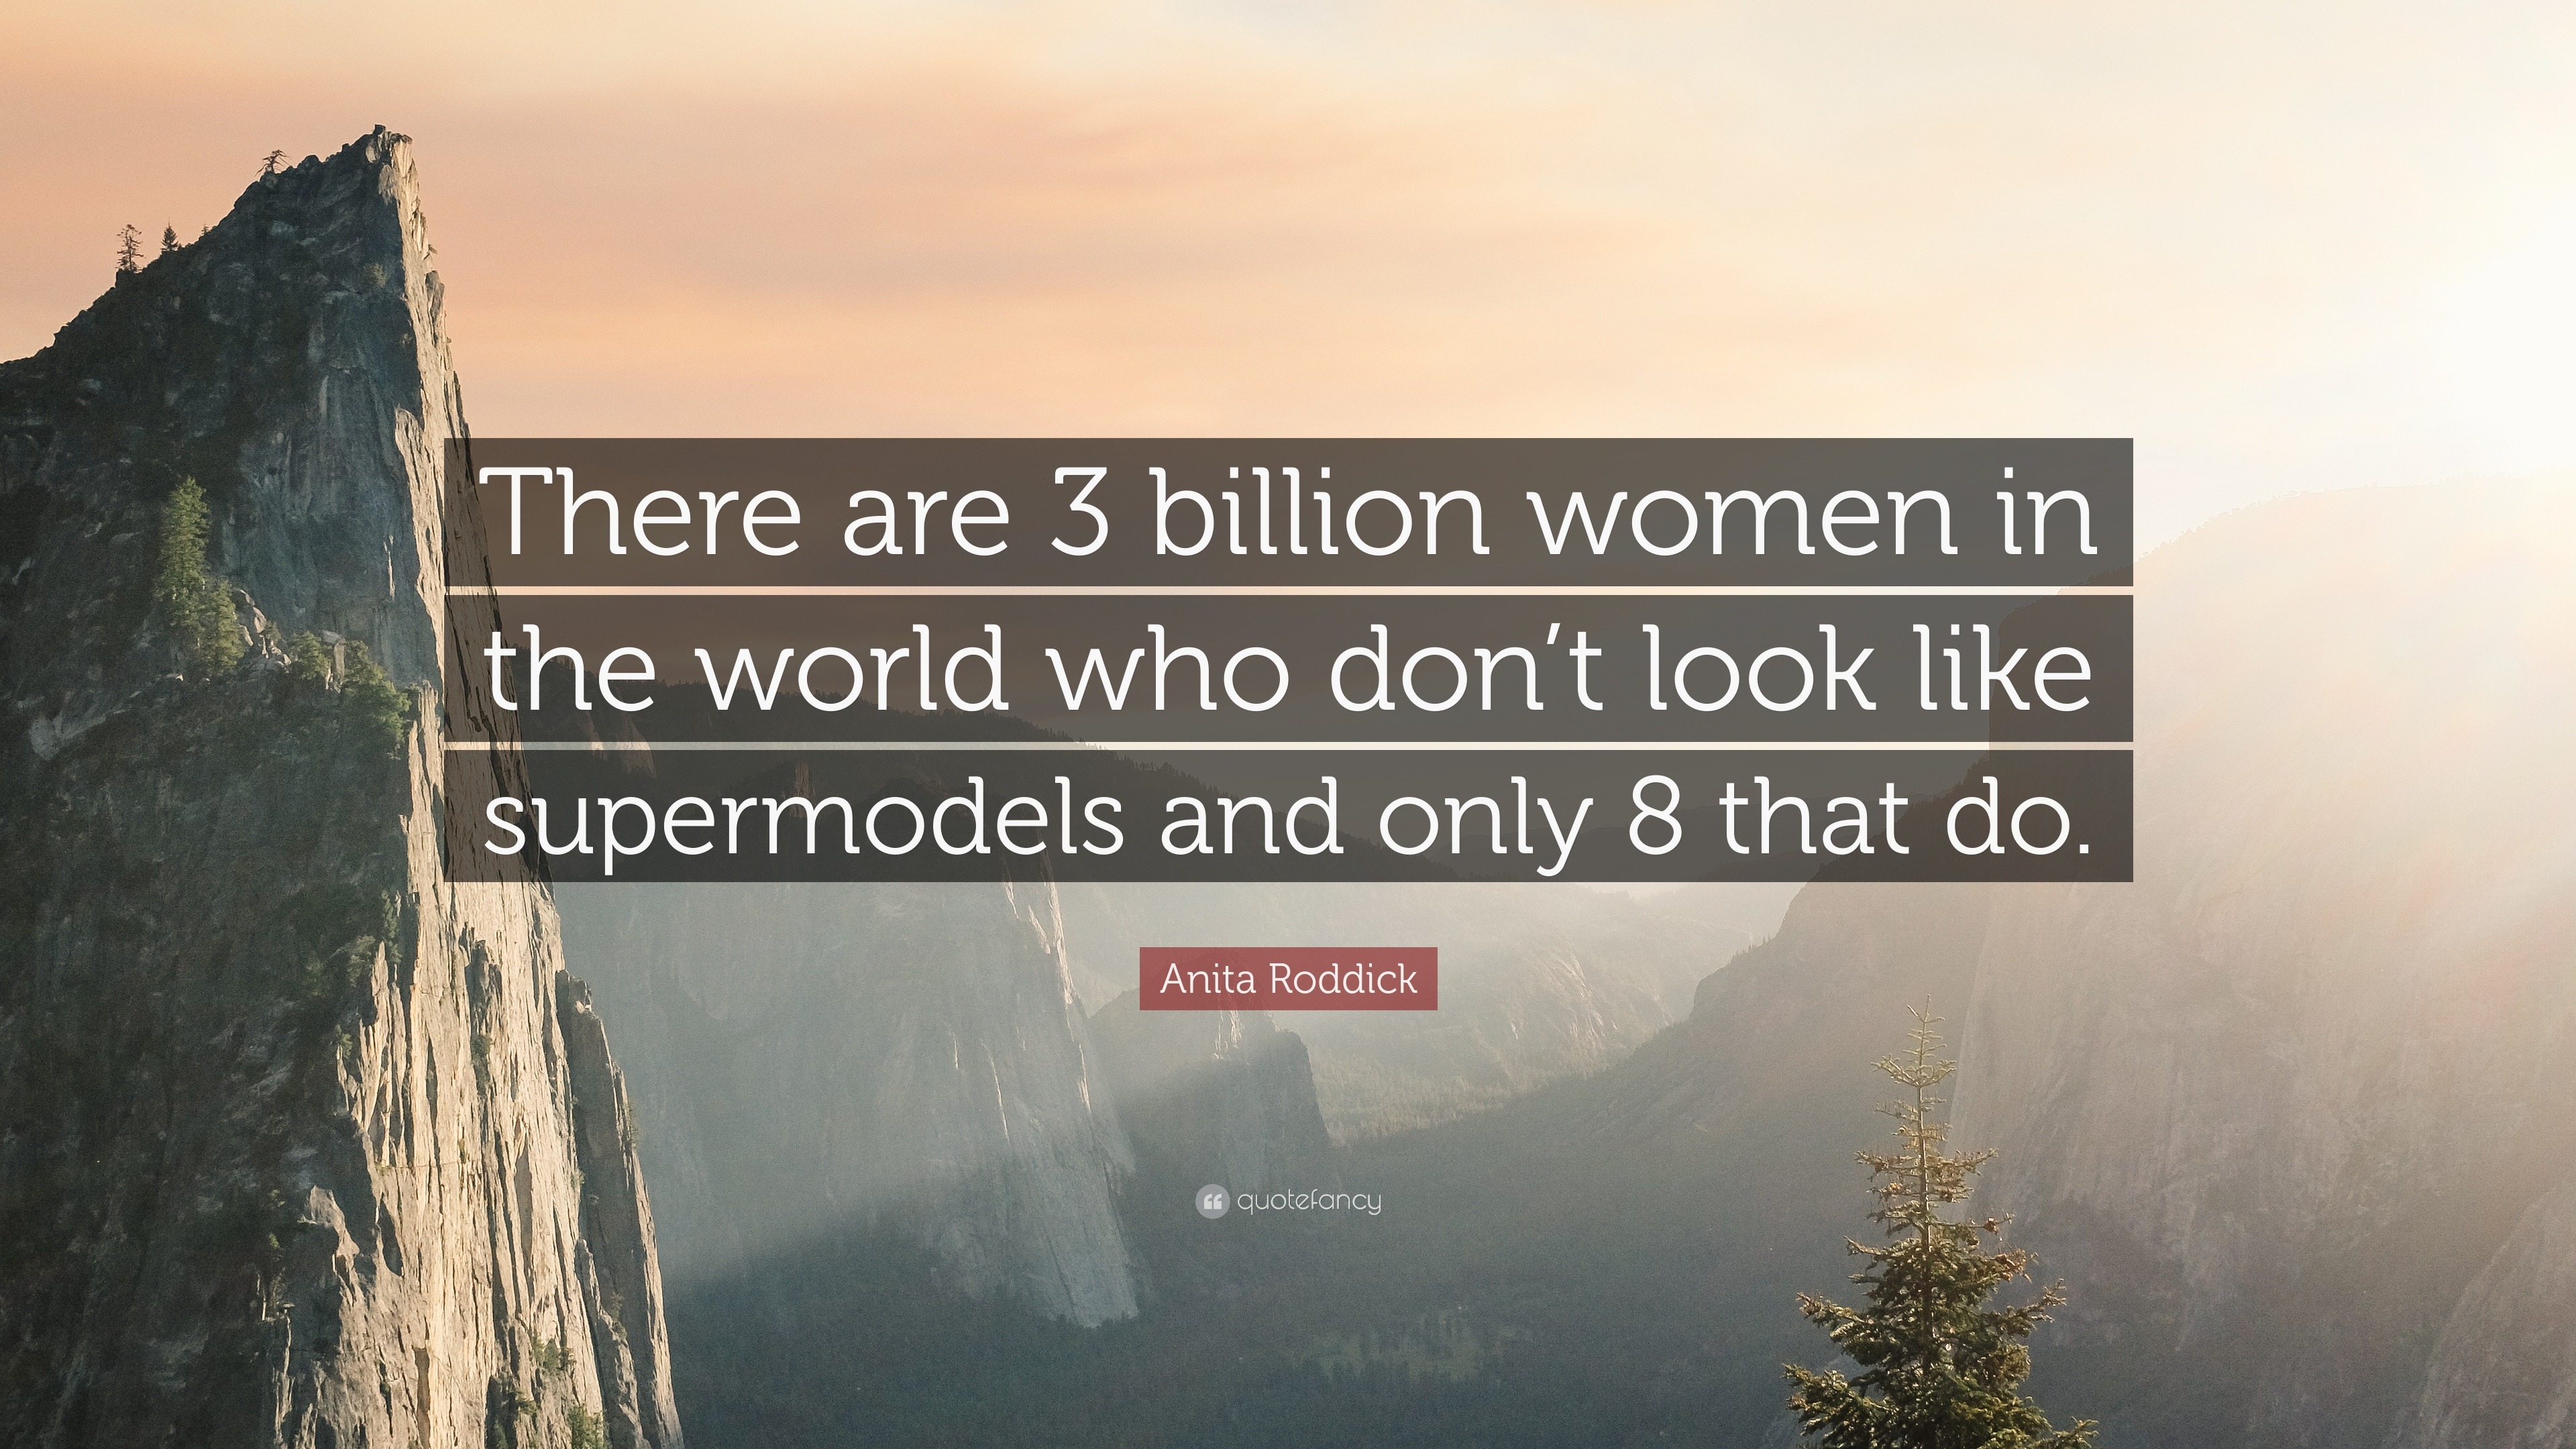 https://quotefancy.com/media/wallpaper/3840x2160/728551-Anita-Roddick-Quote-There-are-3-billion-women-in-the-world-who-don.jpg